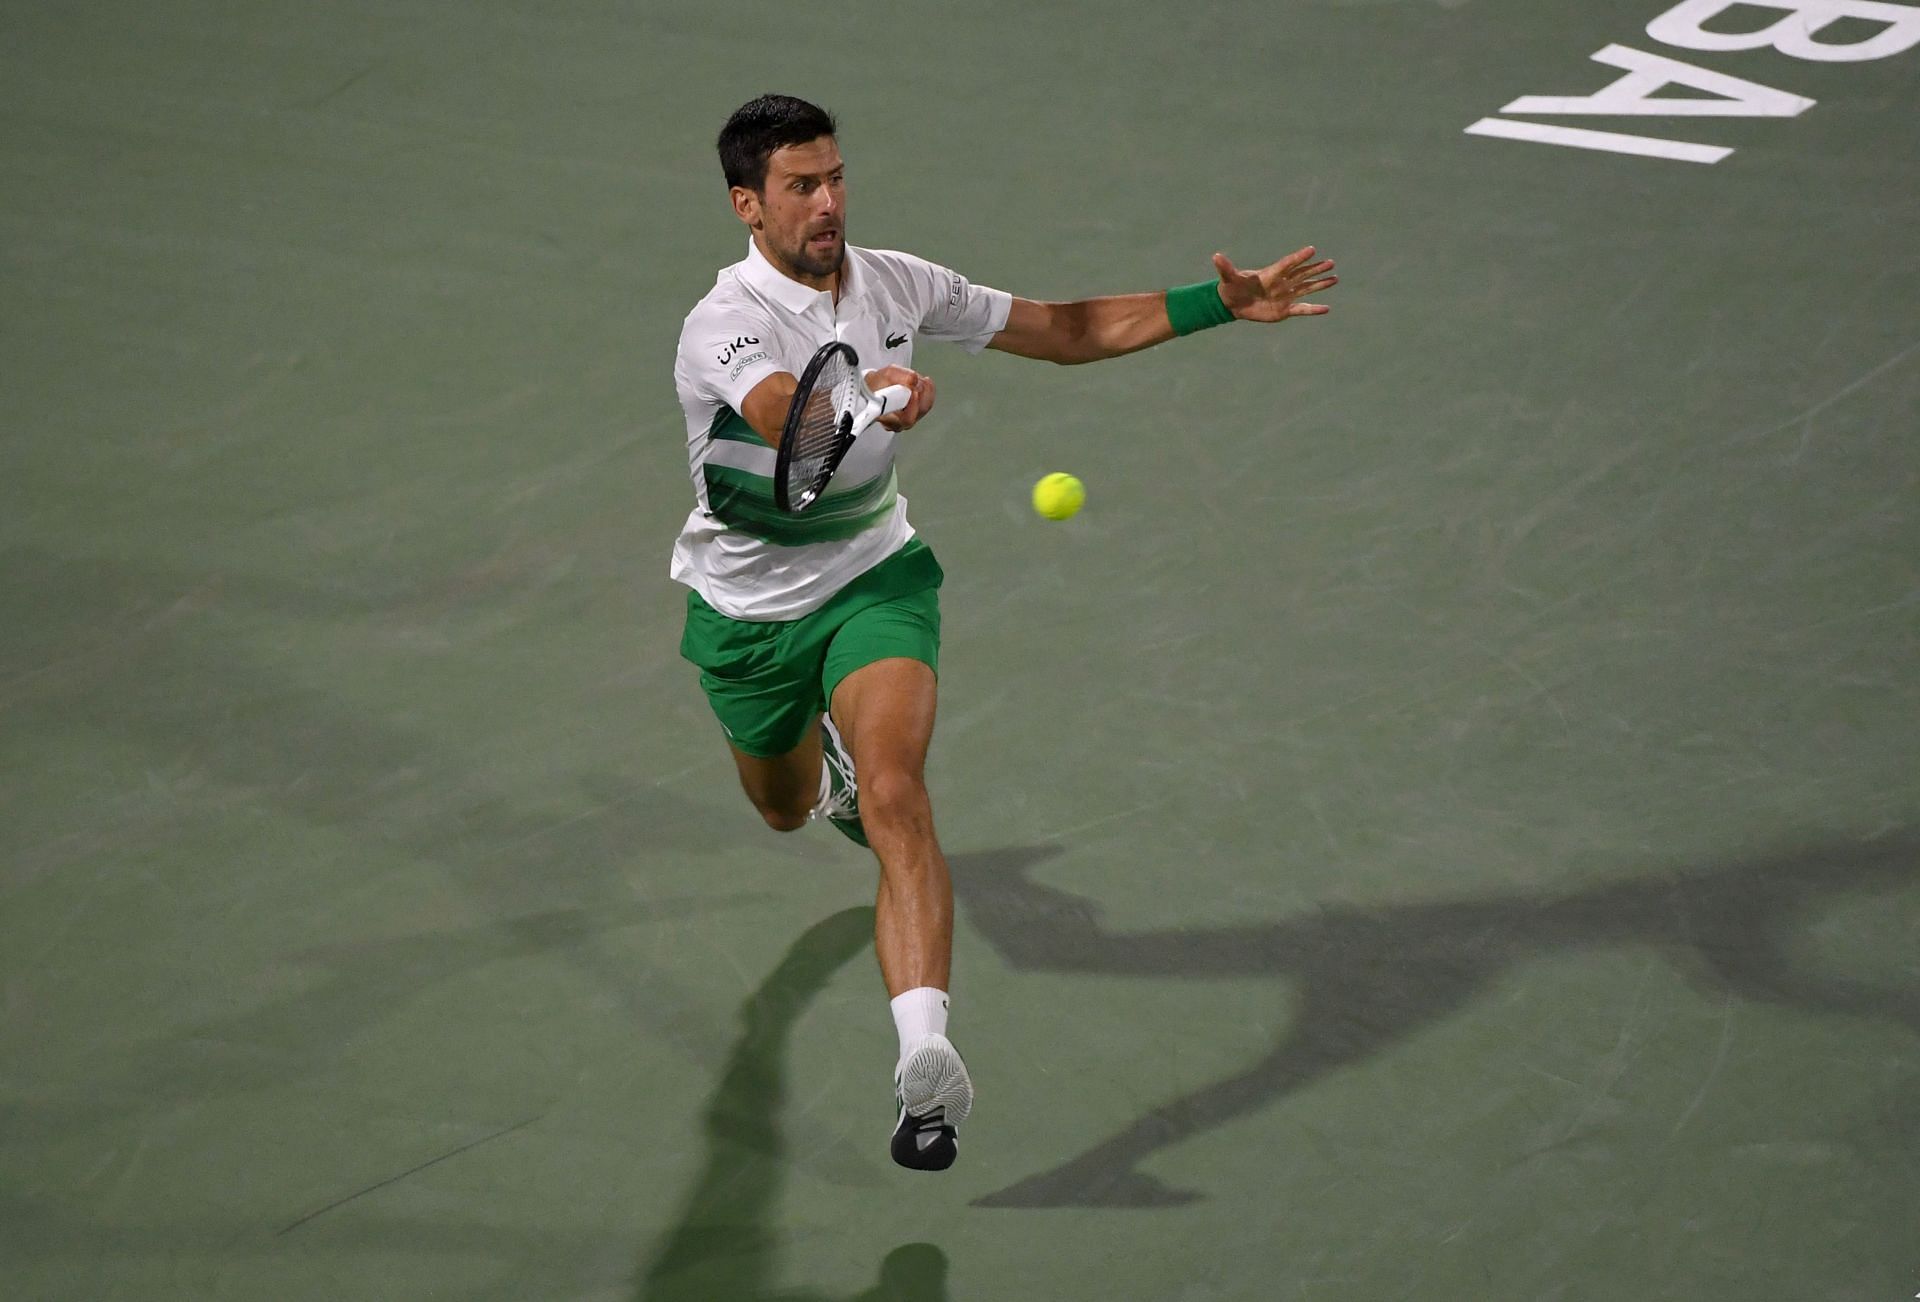 Djokovic during his match against Vesely in Dubai